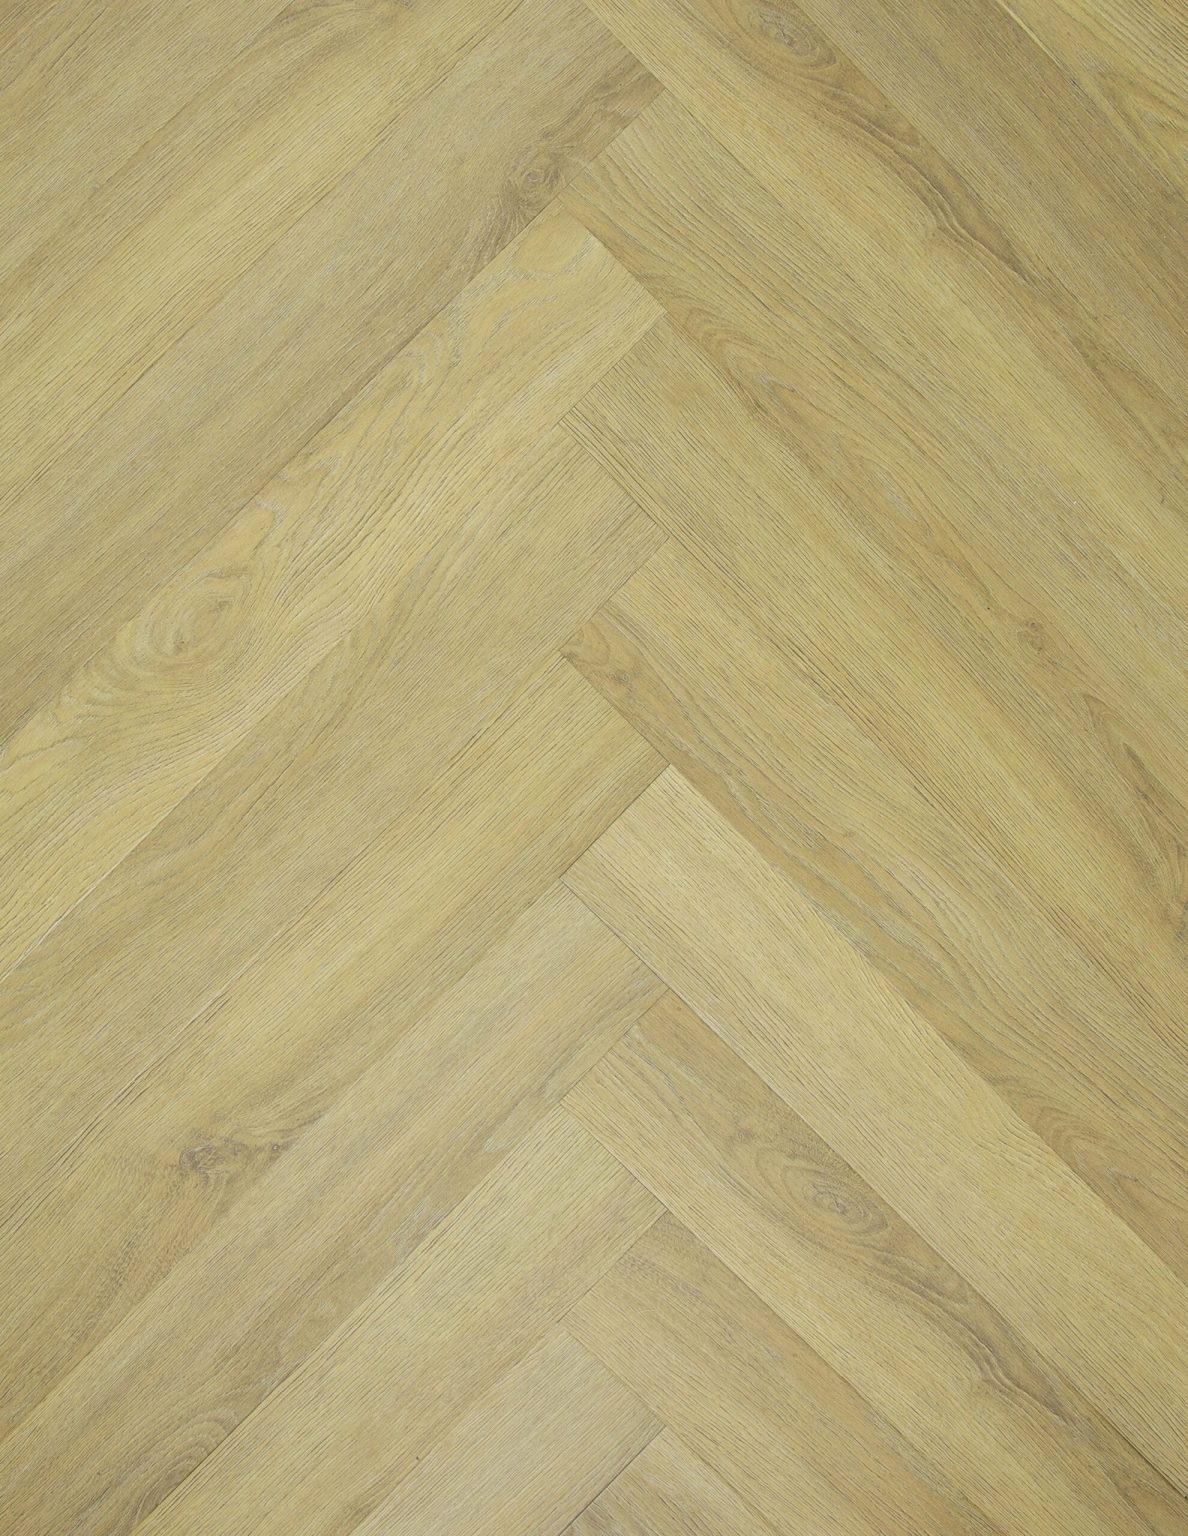 The Ossis 18 herringbone PVC floor allows you to create a sense of dynamism in any space The mediumdark pattern ensures a timeless and luxurious look in your interior